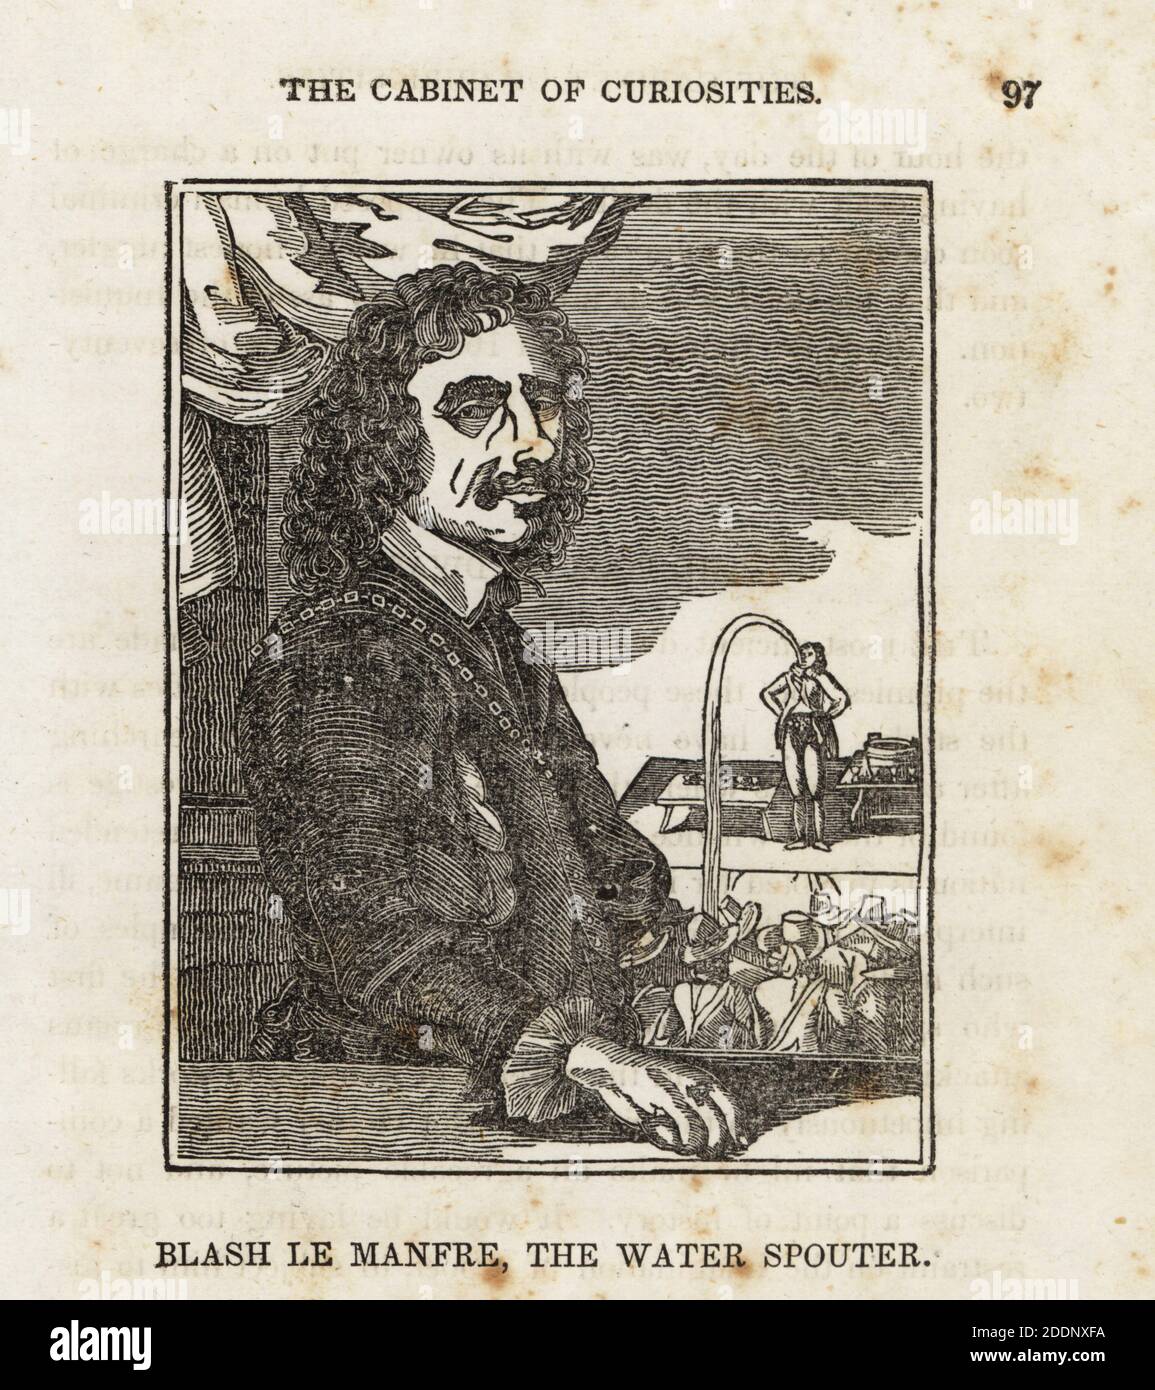 Blasii de Manfre, Blasius Manfredi, the Water Spouter. 17th century Maltese performer who drank water and spouted wine, beer, oil and milk. Magician, puppeteer and juggler, died aged 72 in 1651. Woodcut after Sebastian Janet from The Cabinet of Curiosities, or Wonders of the World Displayed, Henry Piercy, New York, 1836. Stock Photo